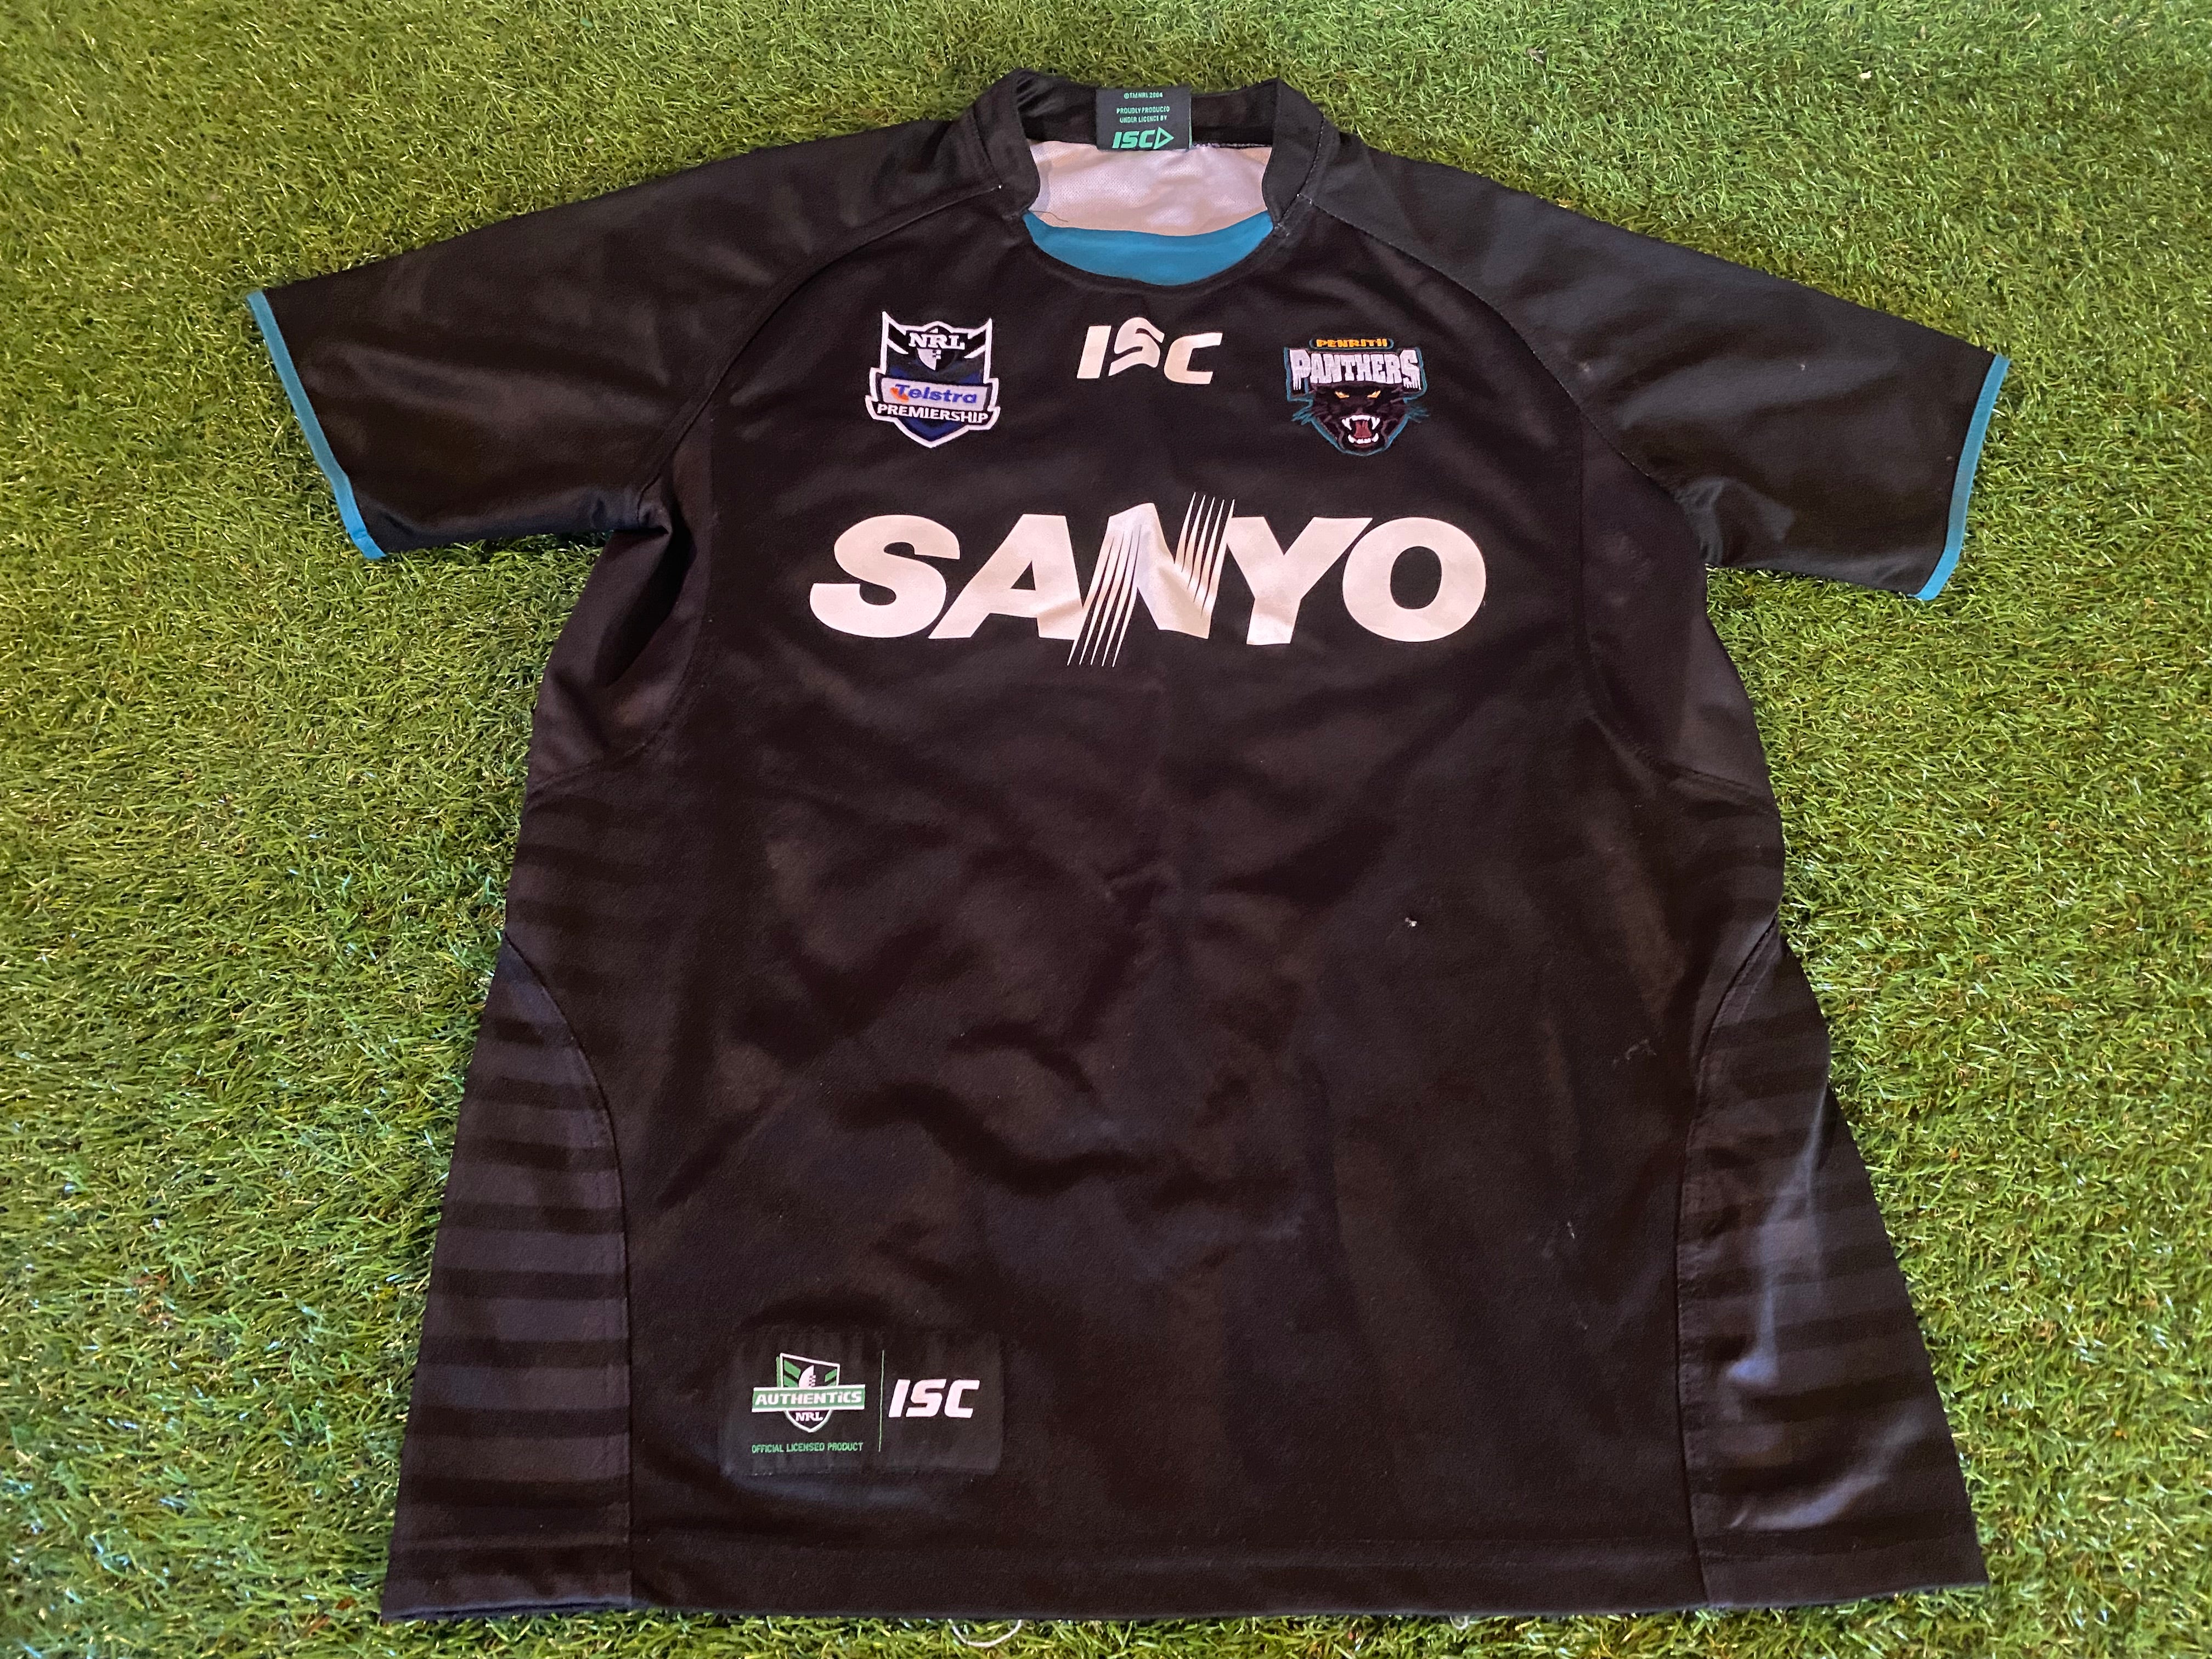 2010 Penrith Panthers Rugby League Away Shirt Large